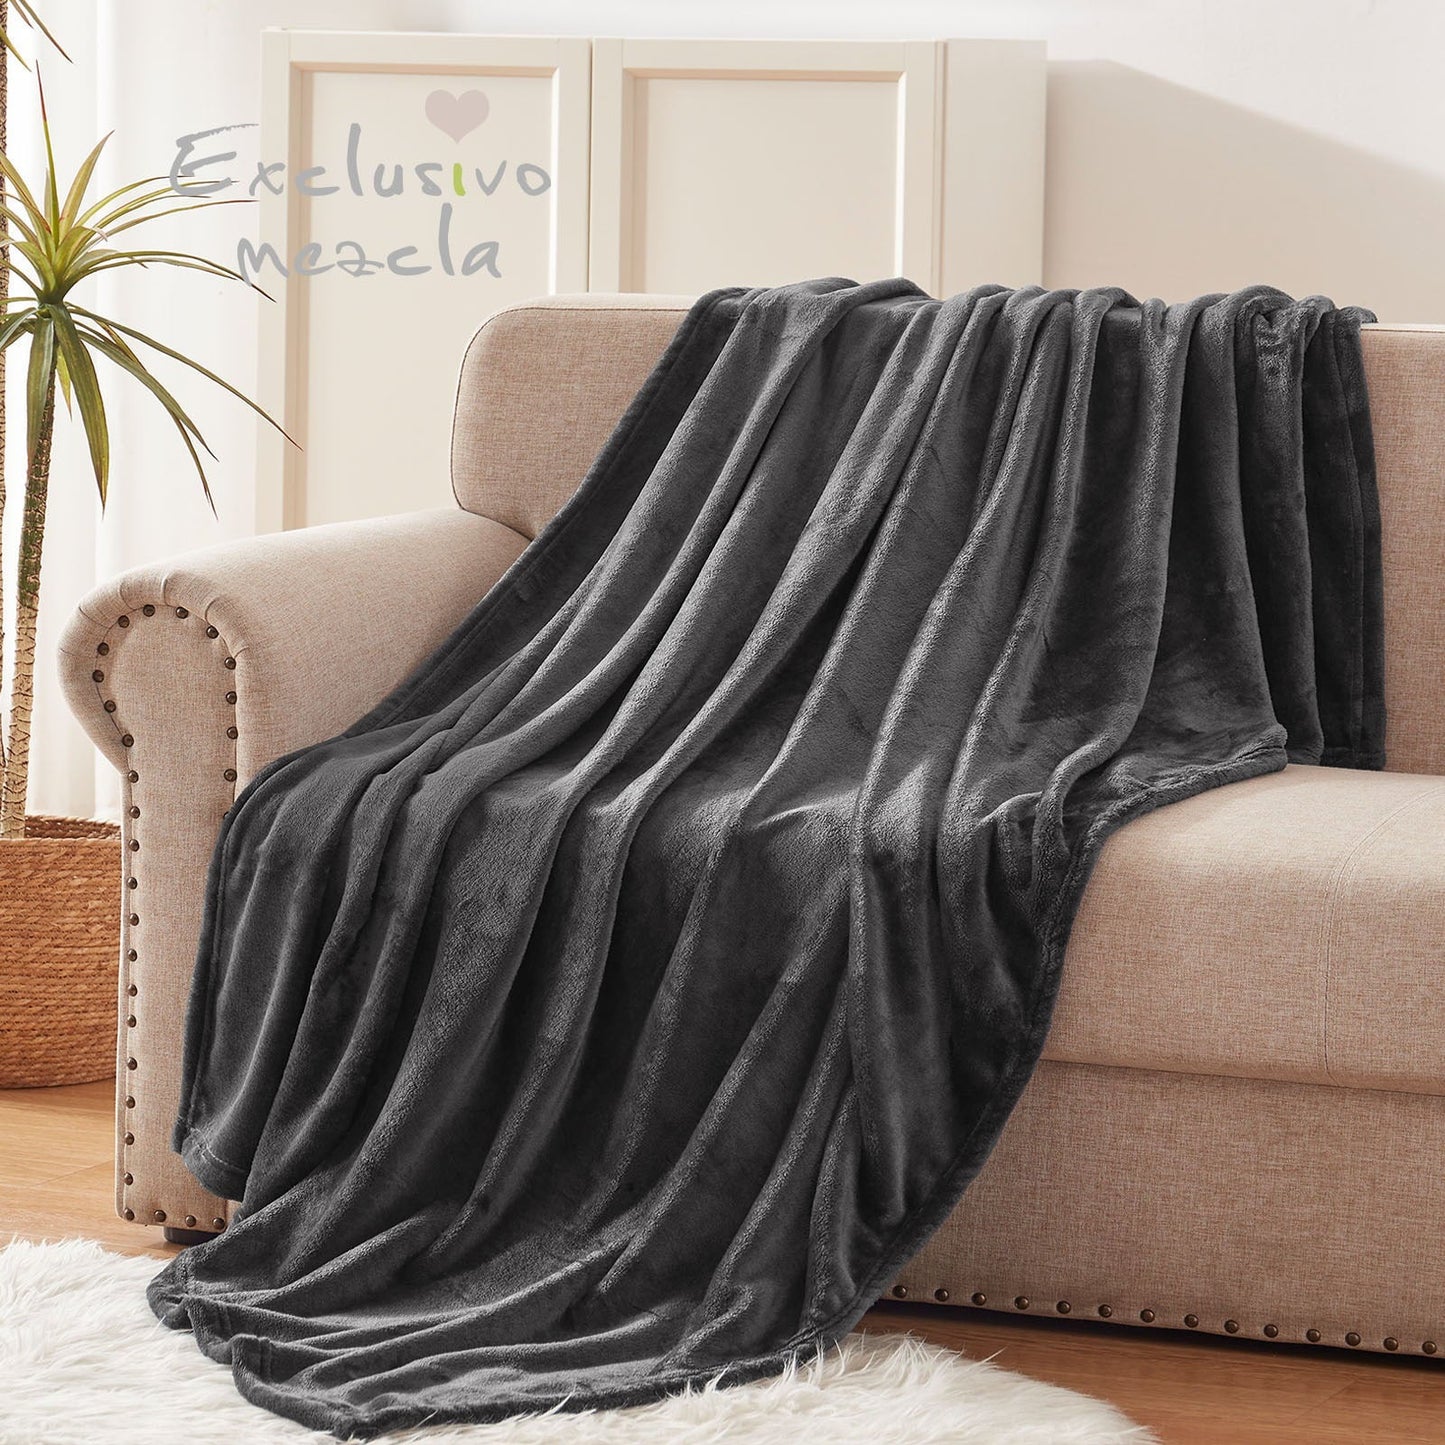 Fleece Throw Blanket for Couch/Bed, Lightweight and Cozy( Ivory )